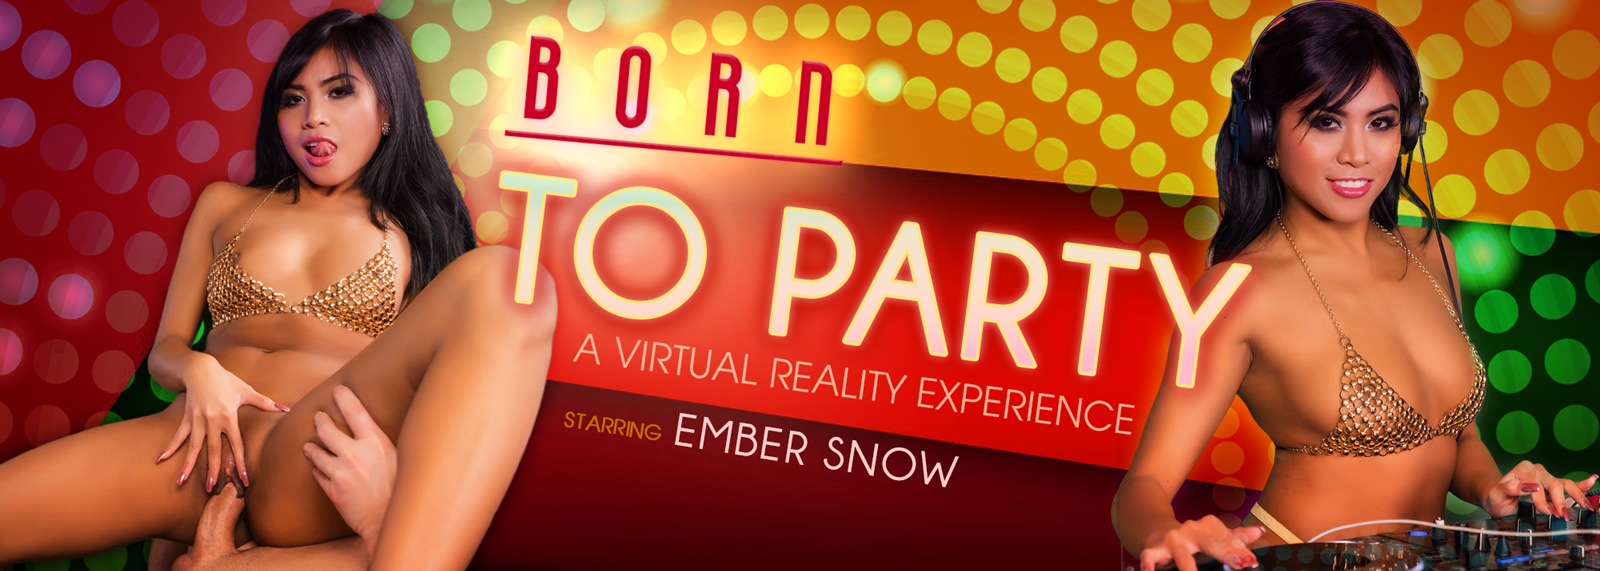 Born to Party - VR Porn Video, Starring: Ember Snow